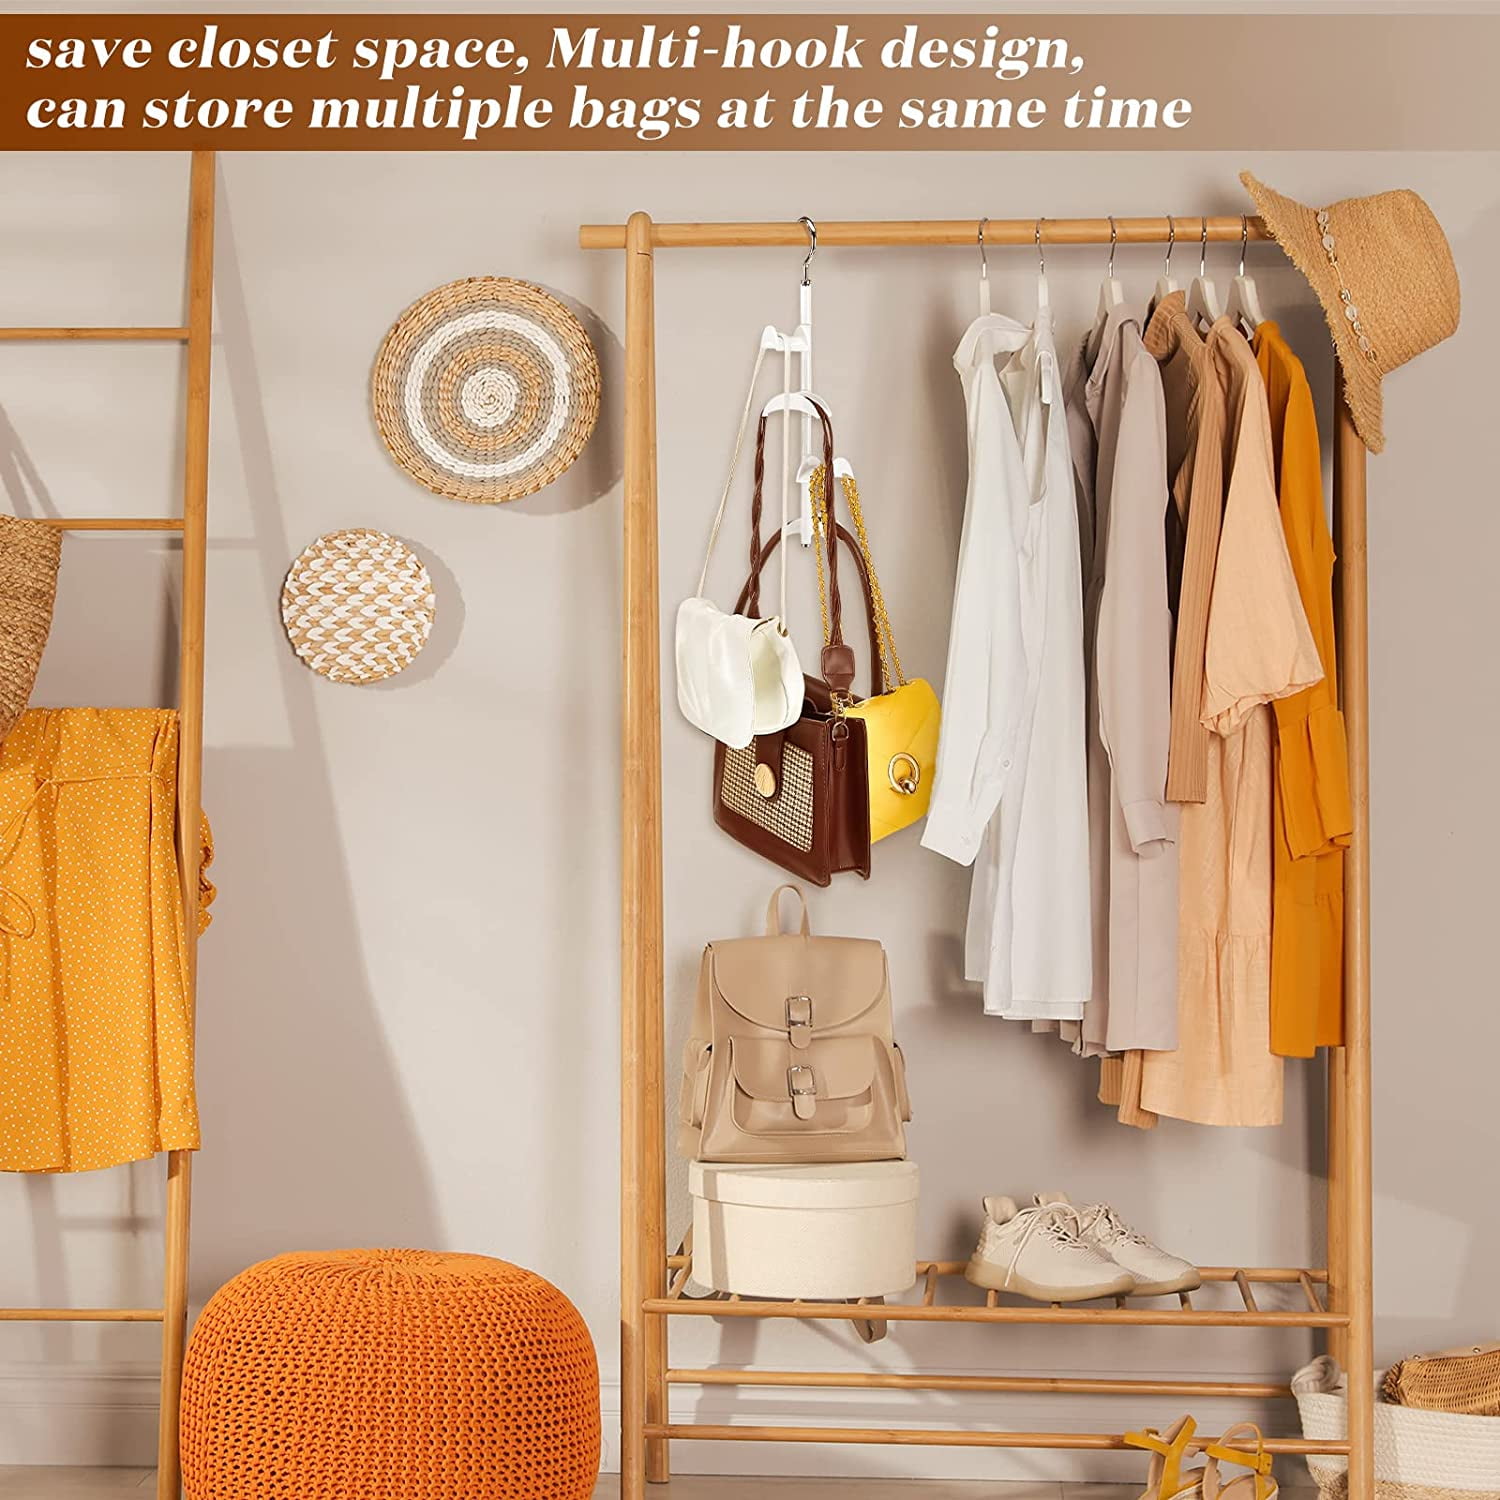 15 closet organizers shoppers rate for small and messy spaces | Real Homes